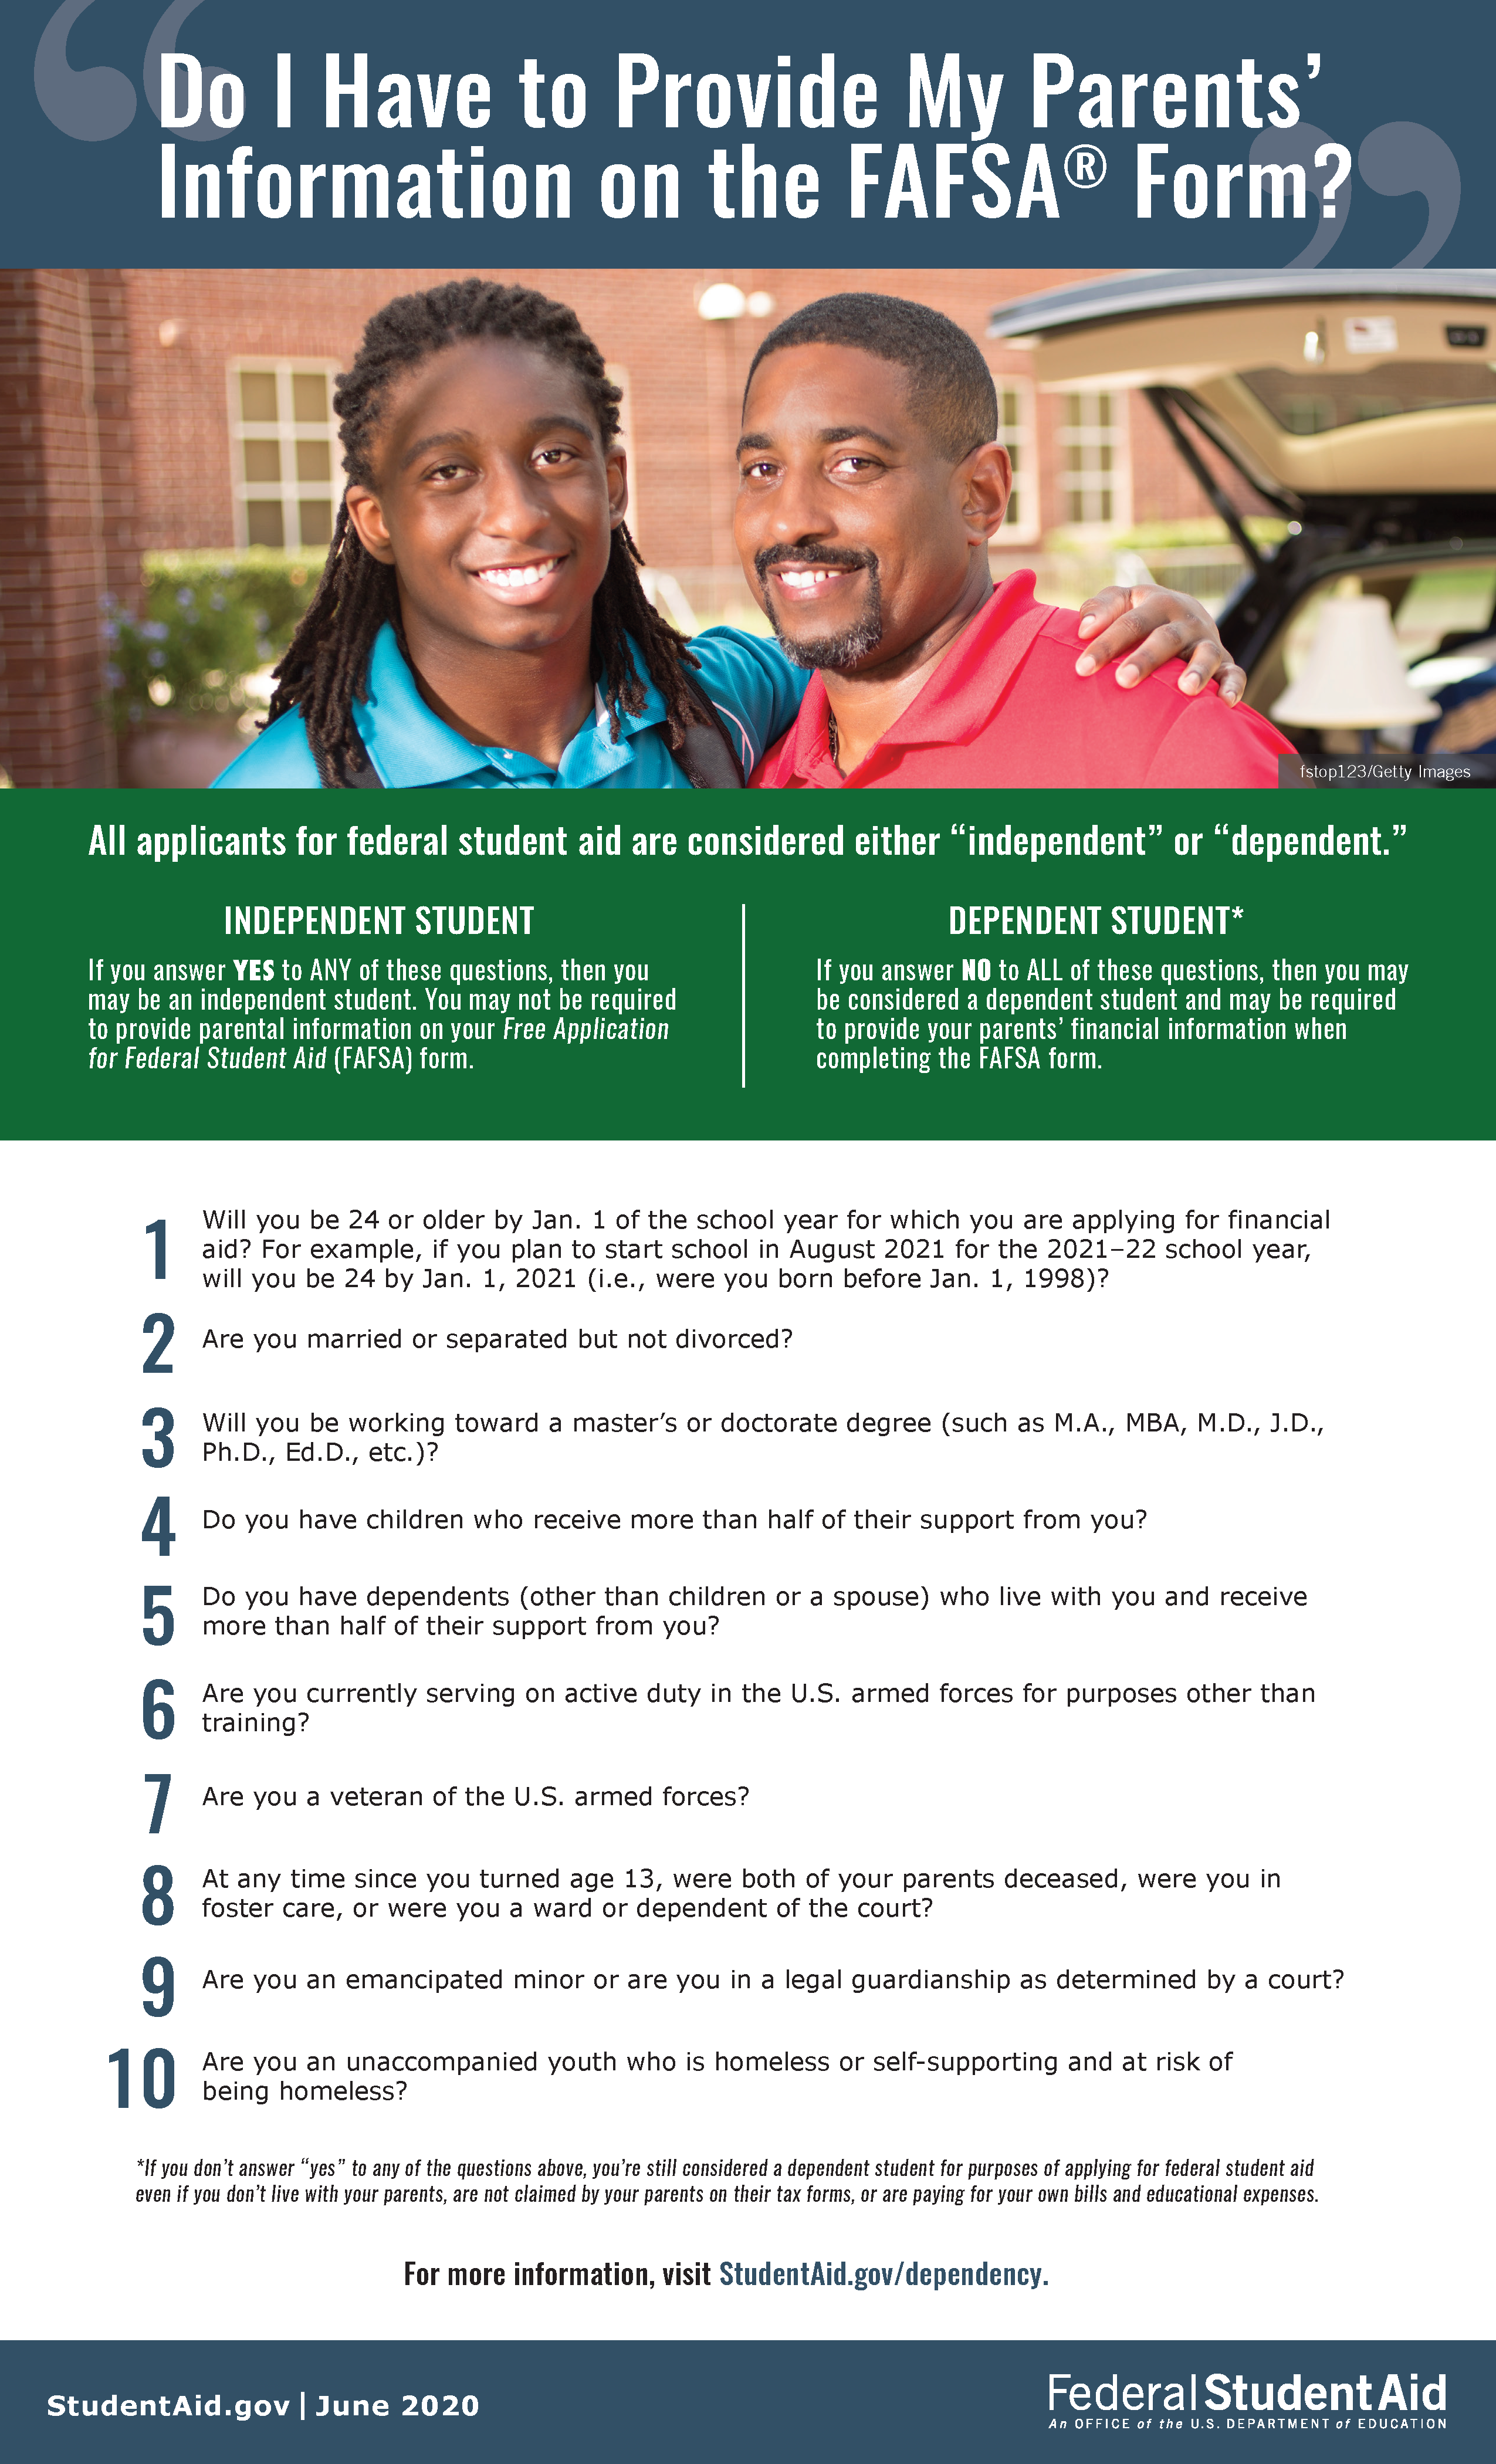 Do I have to provide my parents’ information on the fafsa form? All applicants for federal student aid are considered either independent or dependent. Independent student: If you answer yes to any of these questions, then you may be an independent student. You may not be required to provide parental information on your free application for federal student aid (FAFSA) form.  Dependent student: If you answer no to all of these questions, then you may be considered a dependent student and may be required to provide your parents’ financial information when completing the fafsa form. 1.	Will you be 24 or older by January 1 of the school year for which you are applying for financial aid? For example, if you plan to start school in august 2021 for the 2021-22 school year, will you be 24 by January 1, 2021 (i.e., were you born before January 1, 1998)? 2.	Are you married or separated by not divorced? 3.	Will you be working toward a masters or doctorate degree (such as MA, MBA, MD, JD, PHD, EDD, etc)? 4.	Do you have children who receive more than half of their support from you? 5.	Do you have dependents (other than children or a spouse) who live with you and receive more than half of their support from you? 6.	Are you currently serving on active duty in the US armed forces for purposes other than training? 7.	Are you a veteran of the US armed forces? 8.	At any time since you turned age 13, were both of your parents deceased, were you in foster care, or were you a ward or dependent of the court? 9.	Are you an emancipated minor or are you in a legal guardianship as determined by a court? 10.	Are you an unaccompanied youth who is homeless or self-supporting and at risk of being homeless? If you don’t answer yes to any of the questions above, you’re still considered a dependent student for purposes of applying for federal student aid even if you don’t live with your parents, are not claimed by your parents in their tax forms, or are paying for your own bills and educational expenses. For more information, visit studentaid.gove/dependency. Studentaid.gov June 2020 federal student aid an office of the us department of education